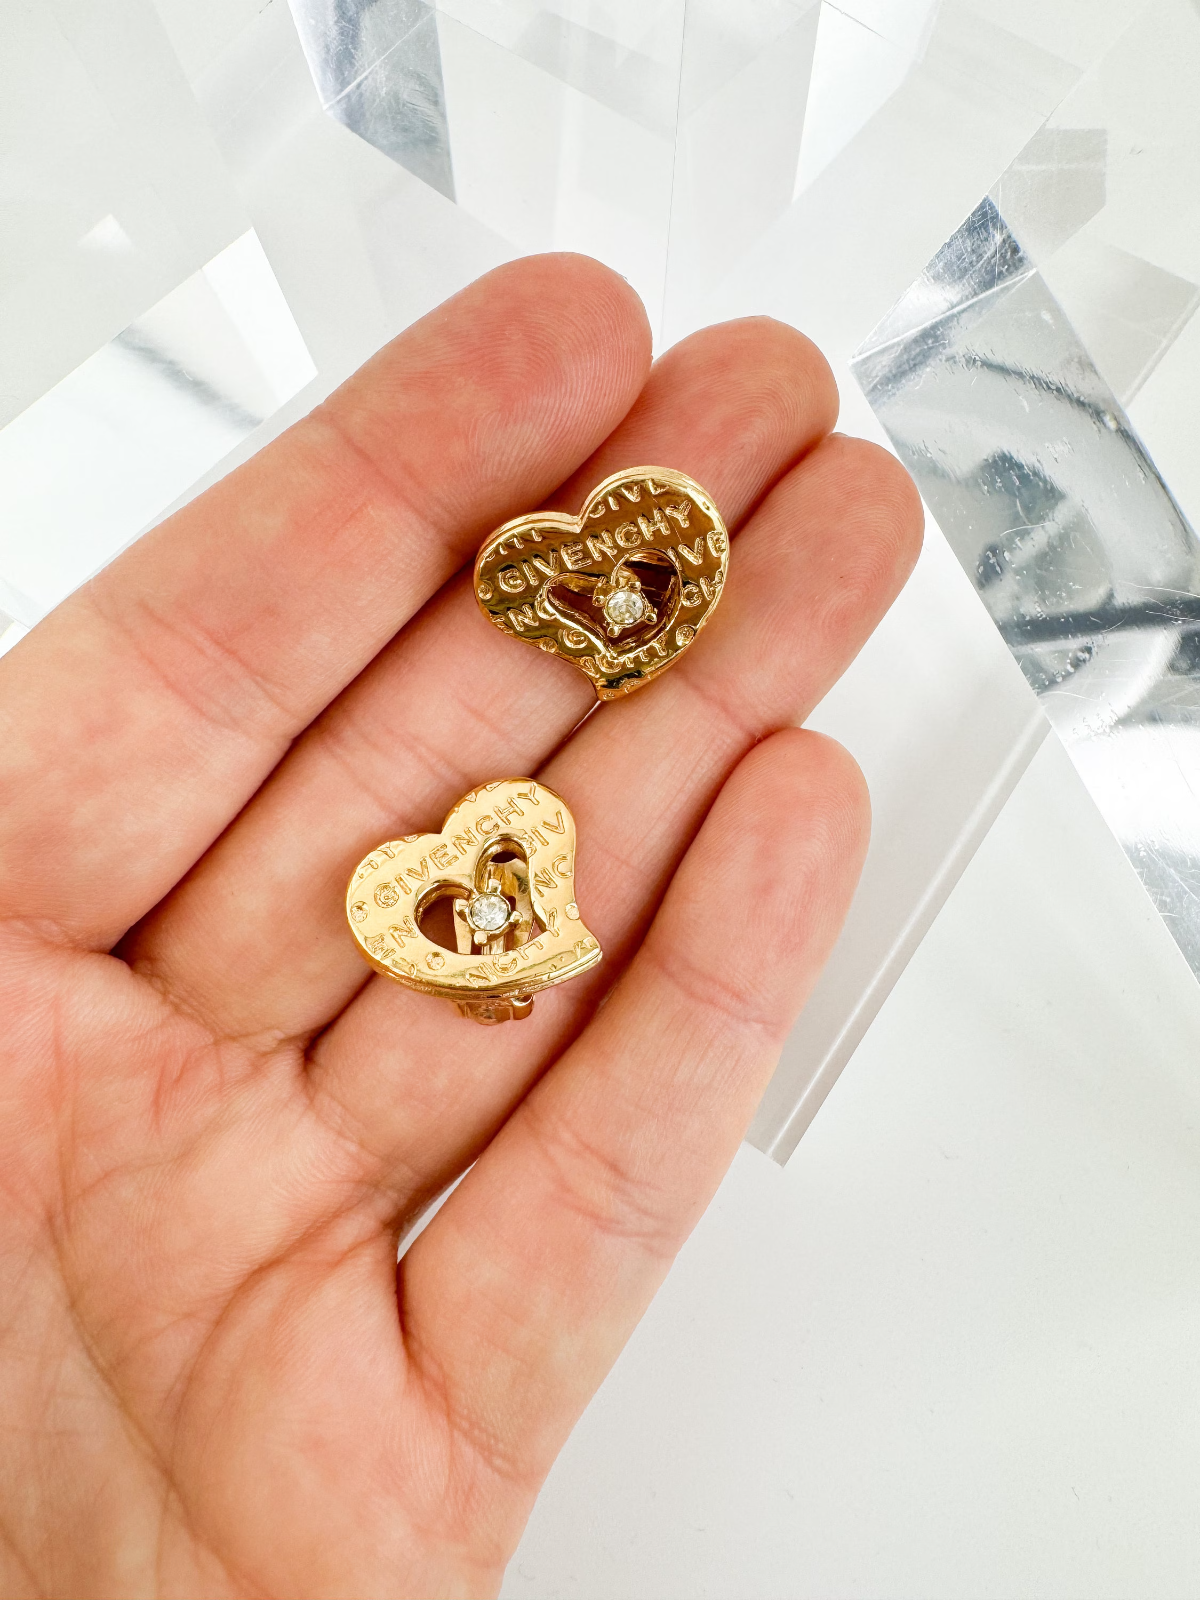 Givenchy Vintage Small Heart Charm Earrings, Gold Tone Earrings, Heart Earrings, Minimalist Earrings Cute Earrings, Gift for her